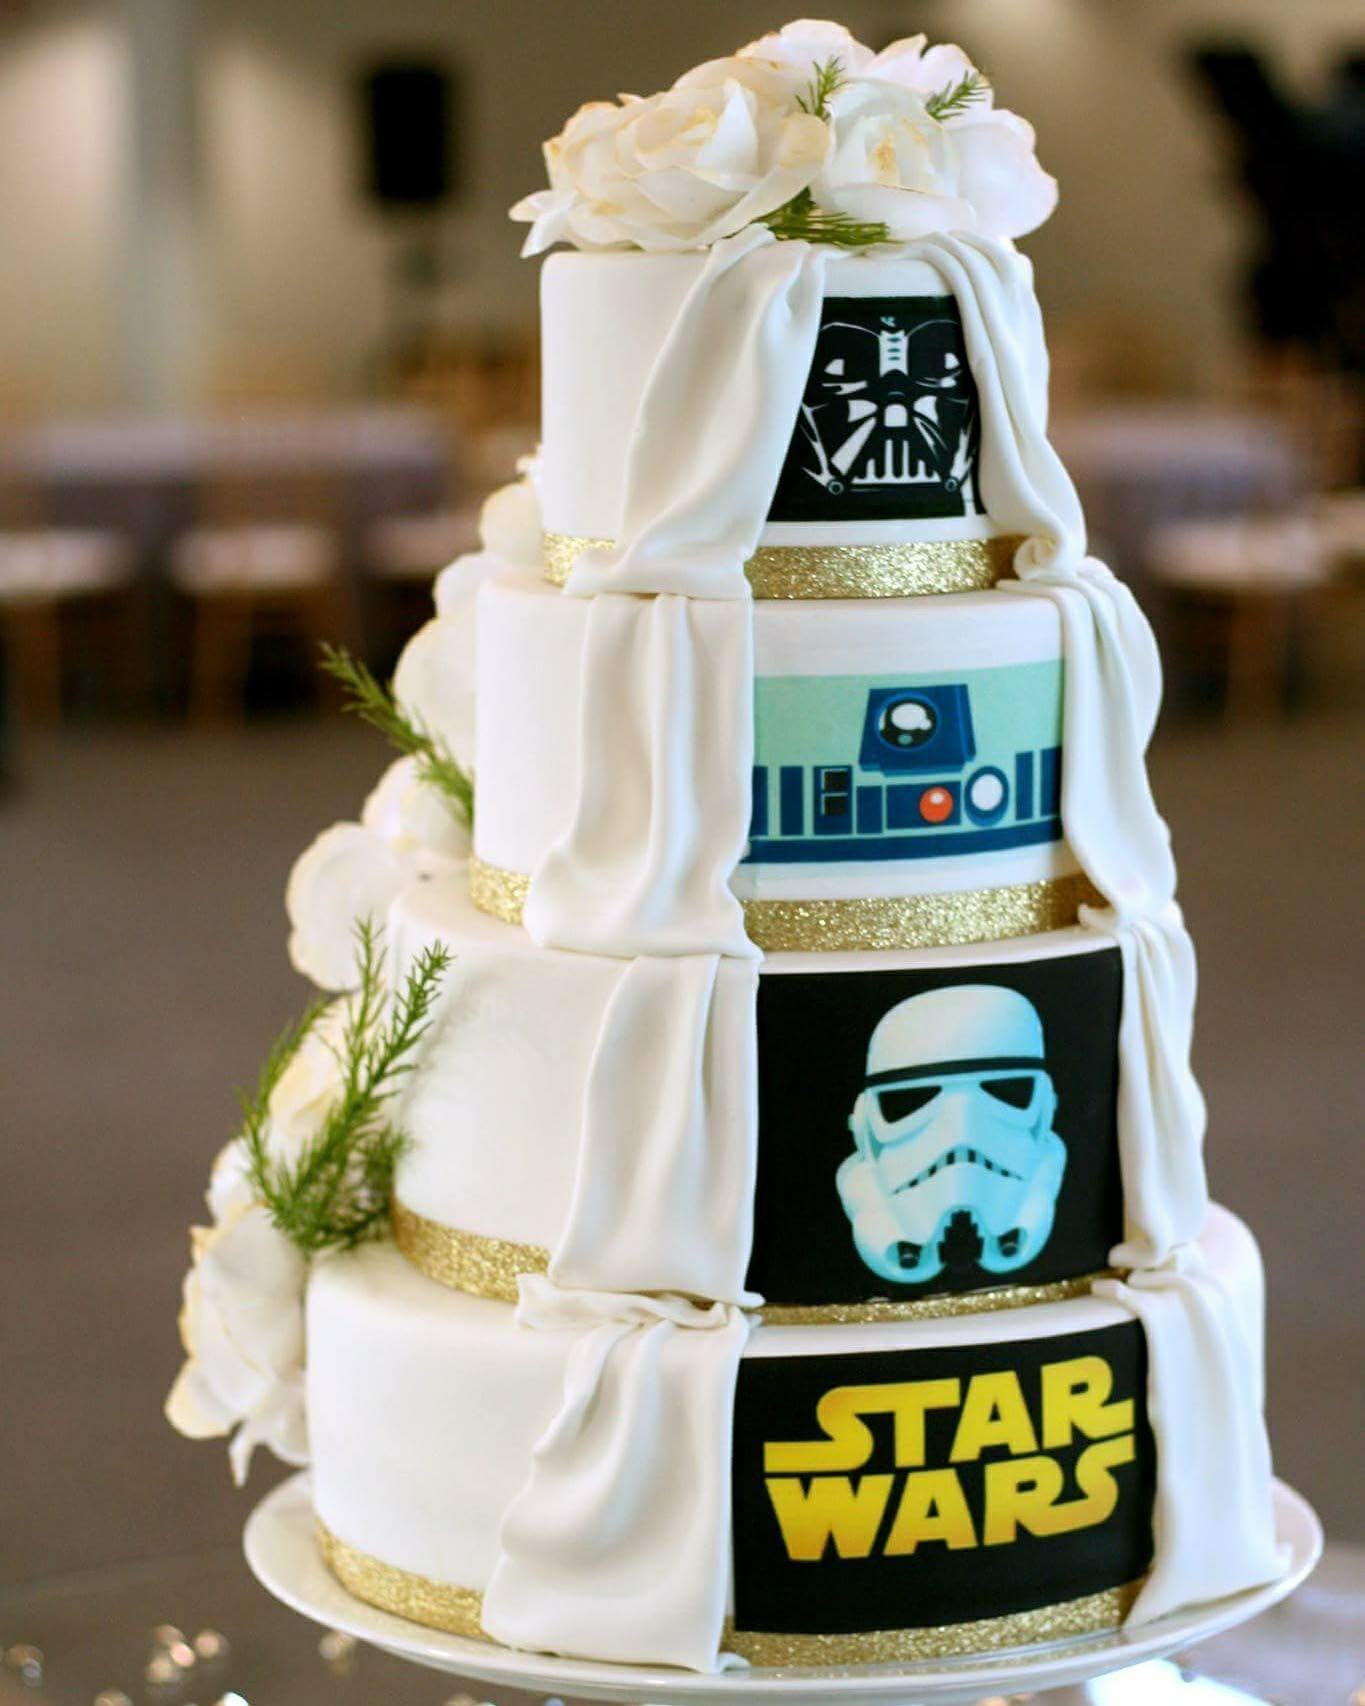 Star Wars Wedding Cakes
 May the force be with you as you plan a Star Wars wedding